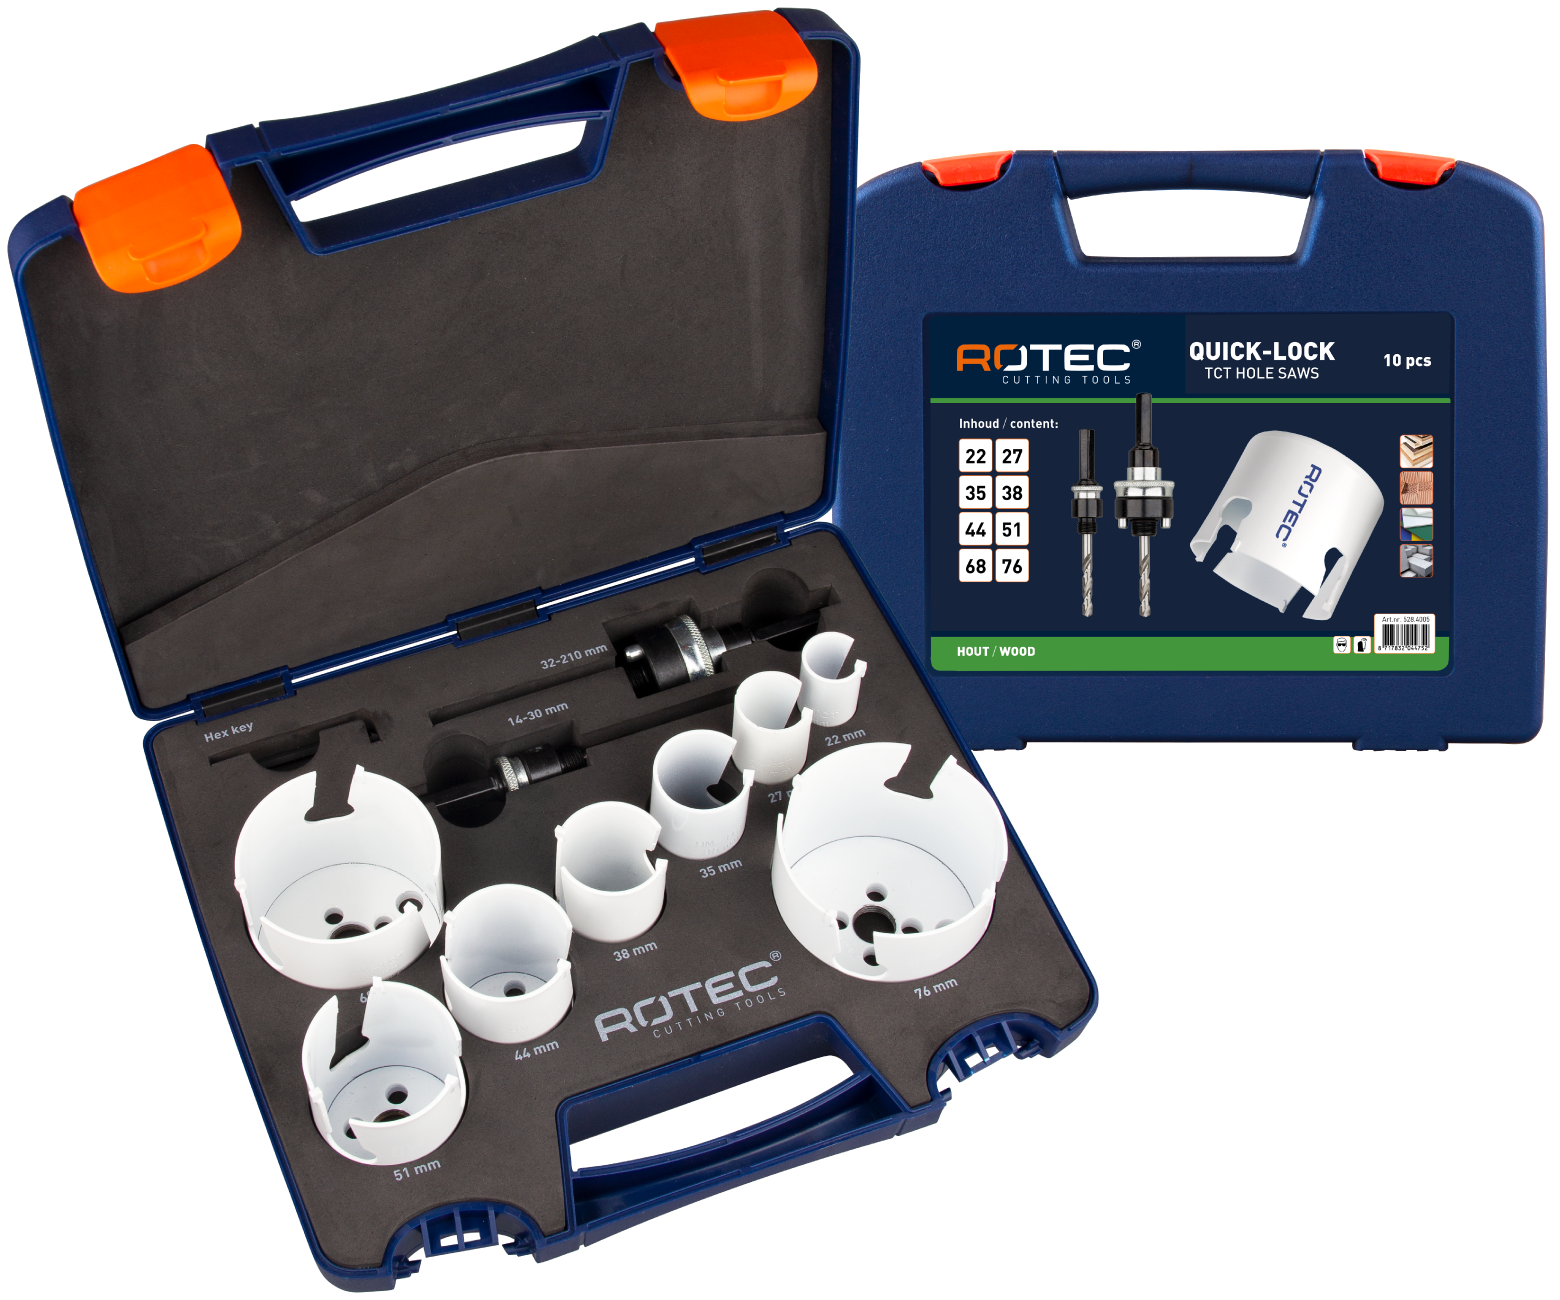 10 pc TCT Multi-Purpose hole saw set type '528 - Electrician' with Quick-Lock